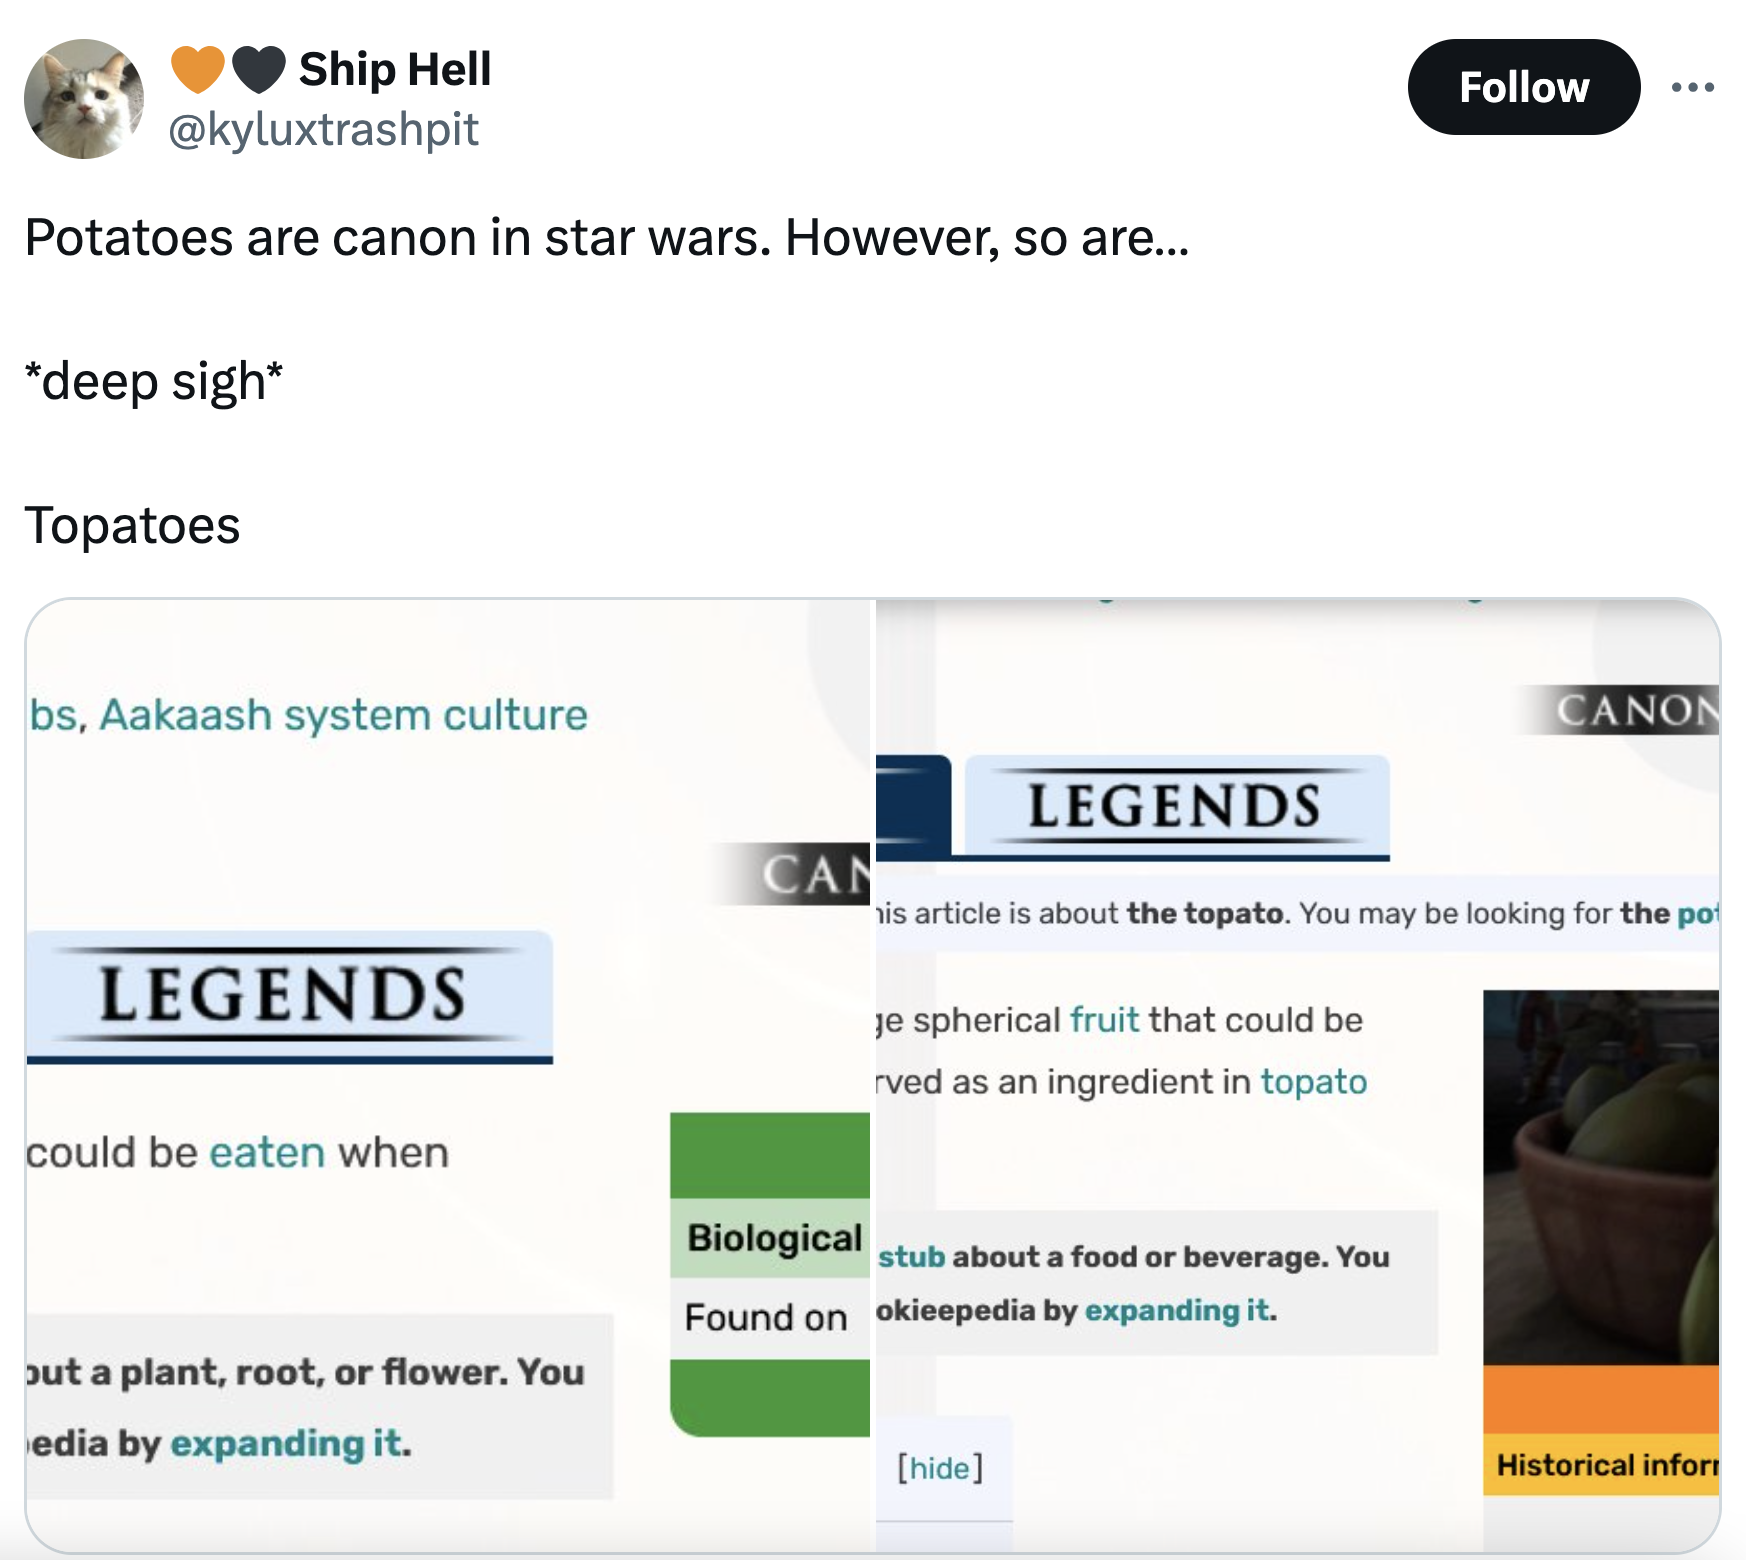 screenshot - Ship Hell Potatoes are canon in star wars. However, so are... deep sigh Topatoes bs, Aakaash system culture Legends could be eaten when Legends Canon Can his article is about the topato. You may be looking for the po je spherical fruit that c